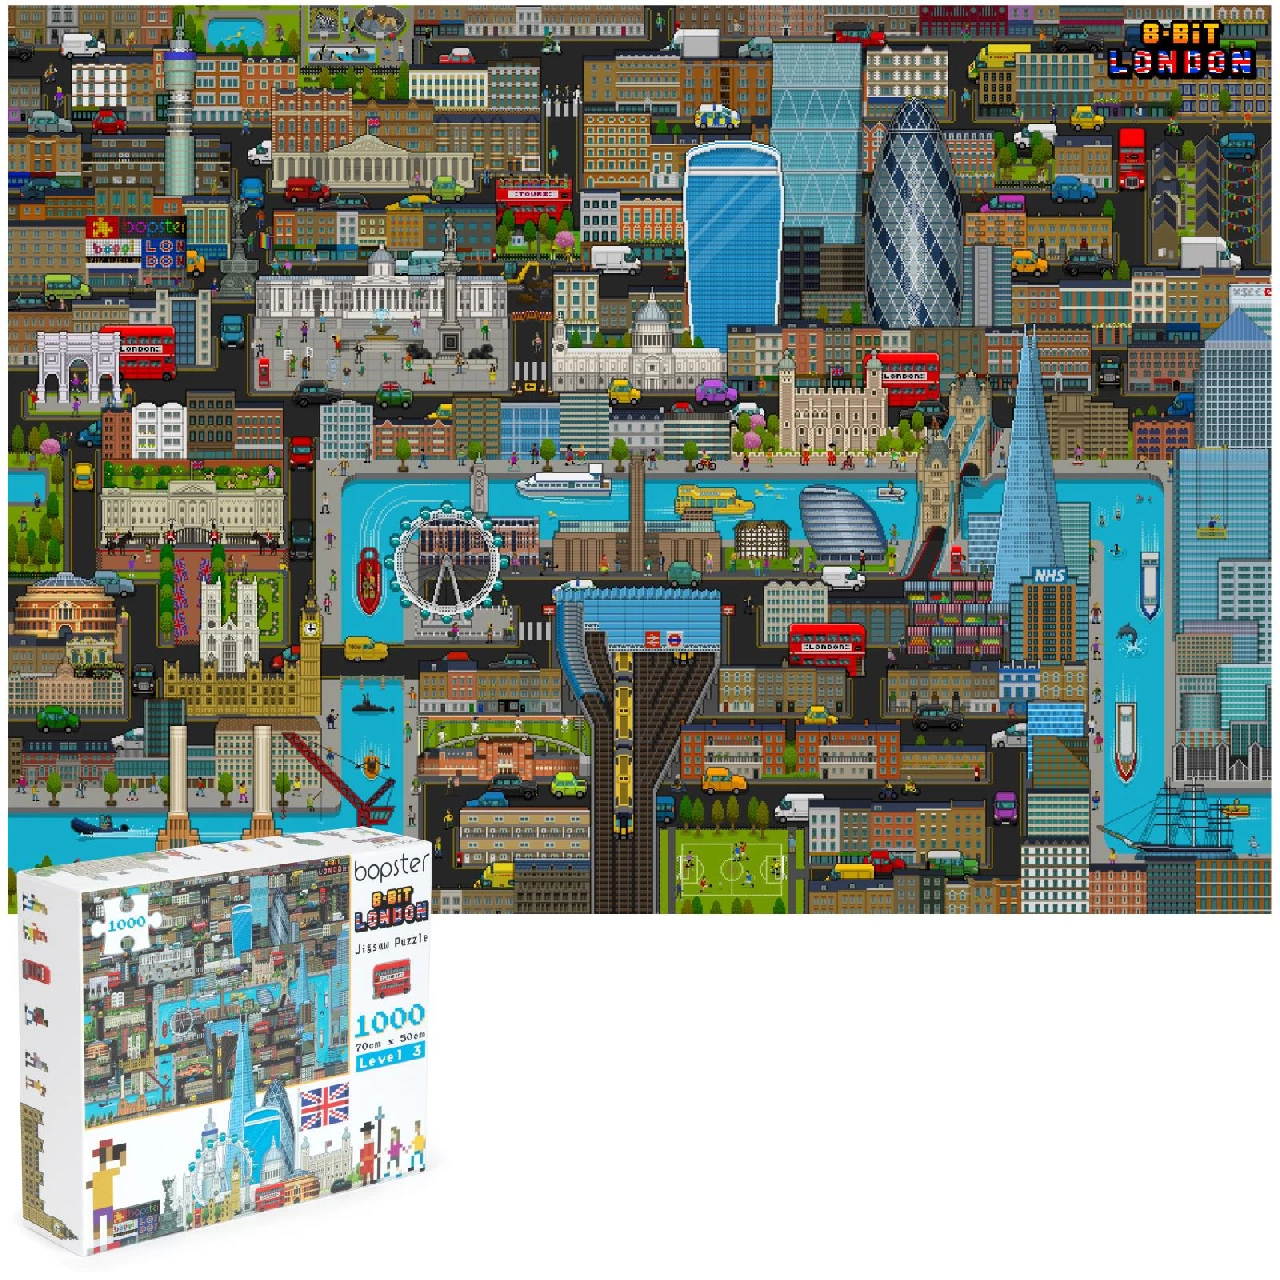 bopster 8-bit London Pixel Jigsaw Puzzle 1000 Pieces for Kids Teens and Adults 70 x 50cm Level 3